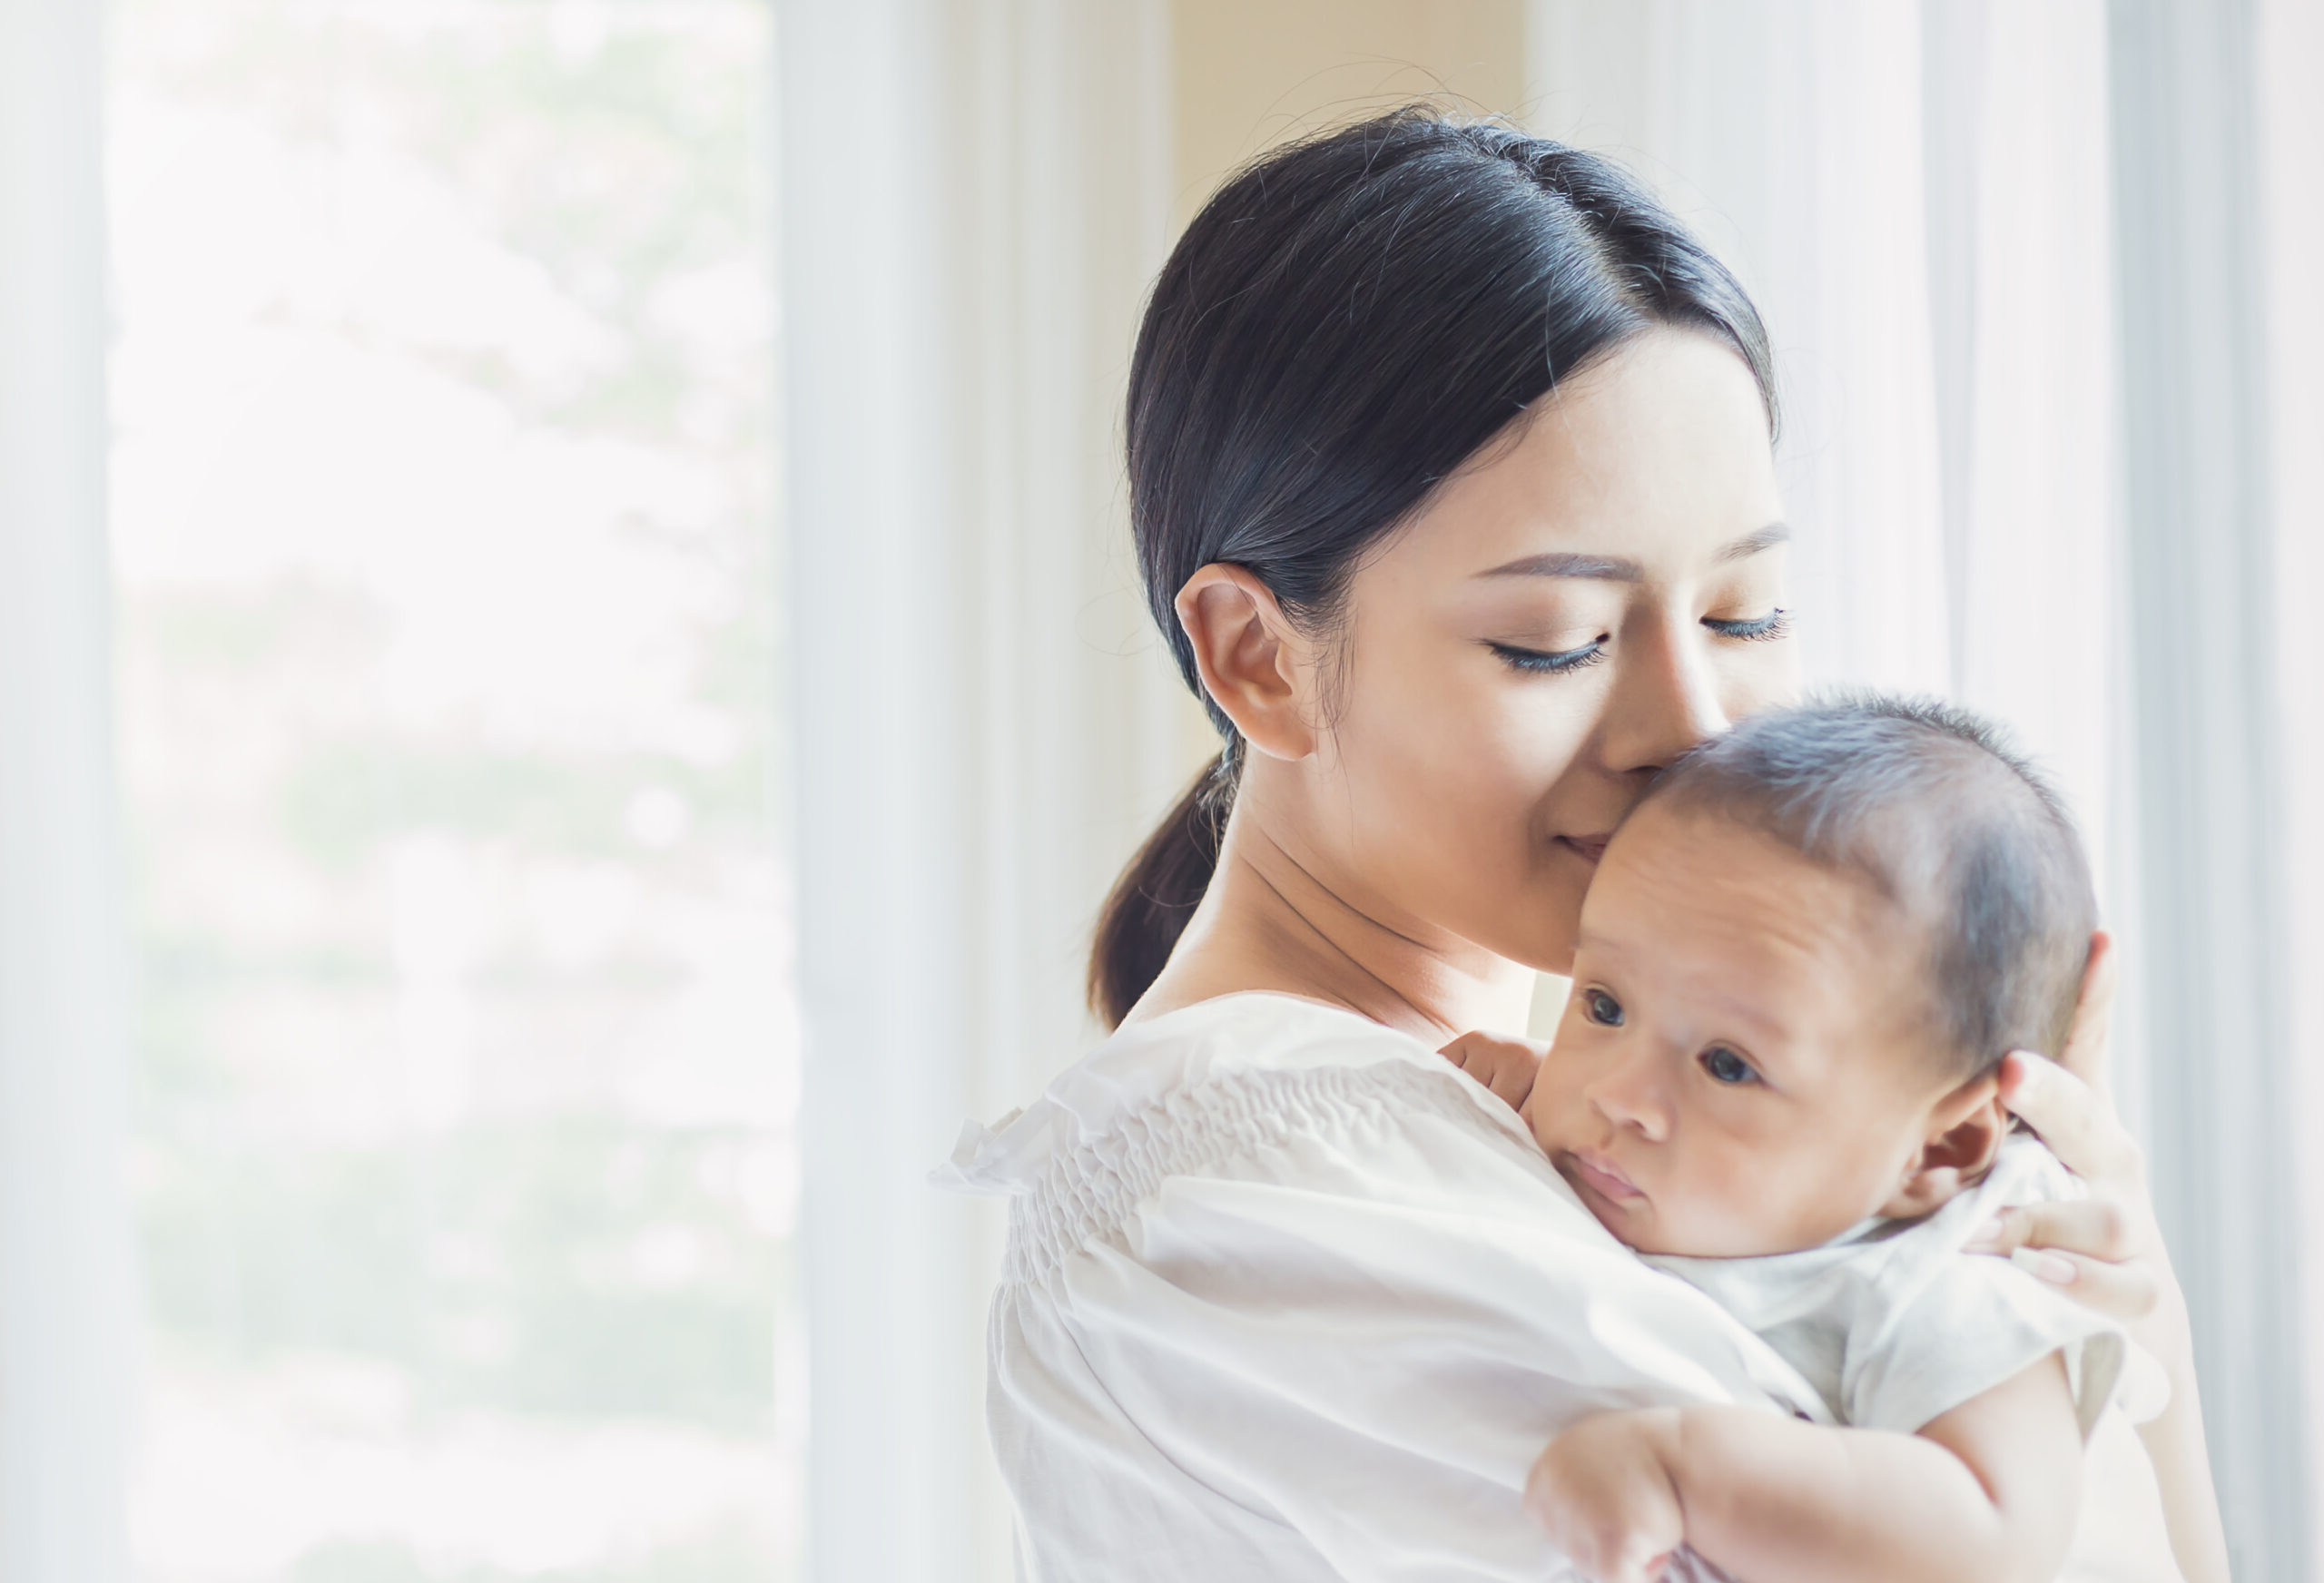 New Parents Guide to Financial Planning in 2021